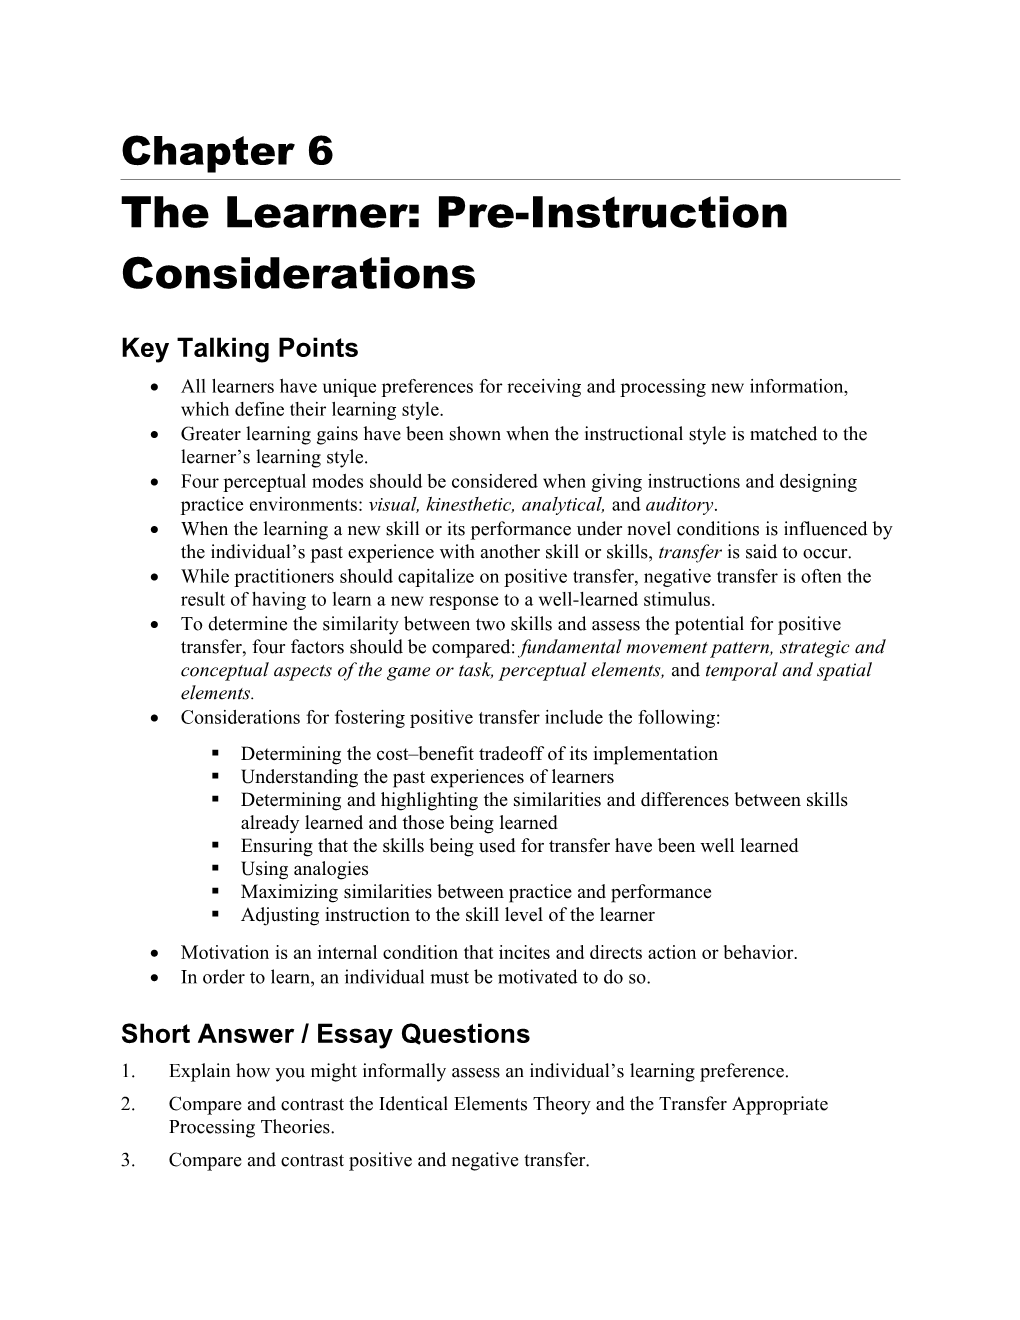 The Learner: Pre-Instruction Considerations